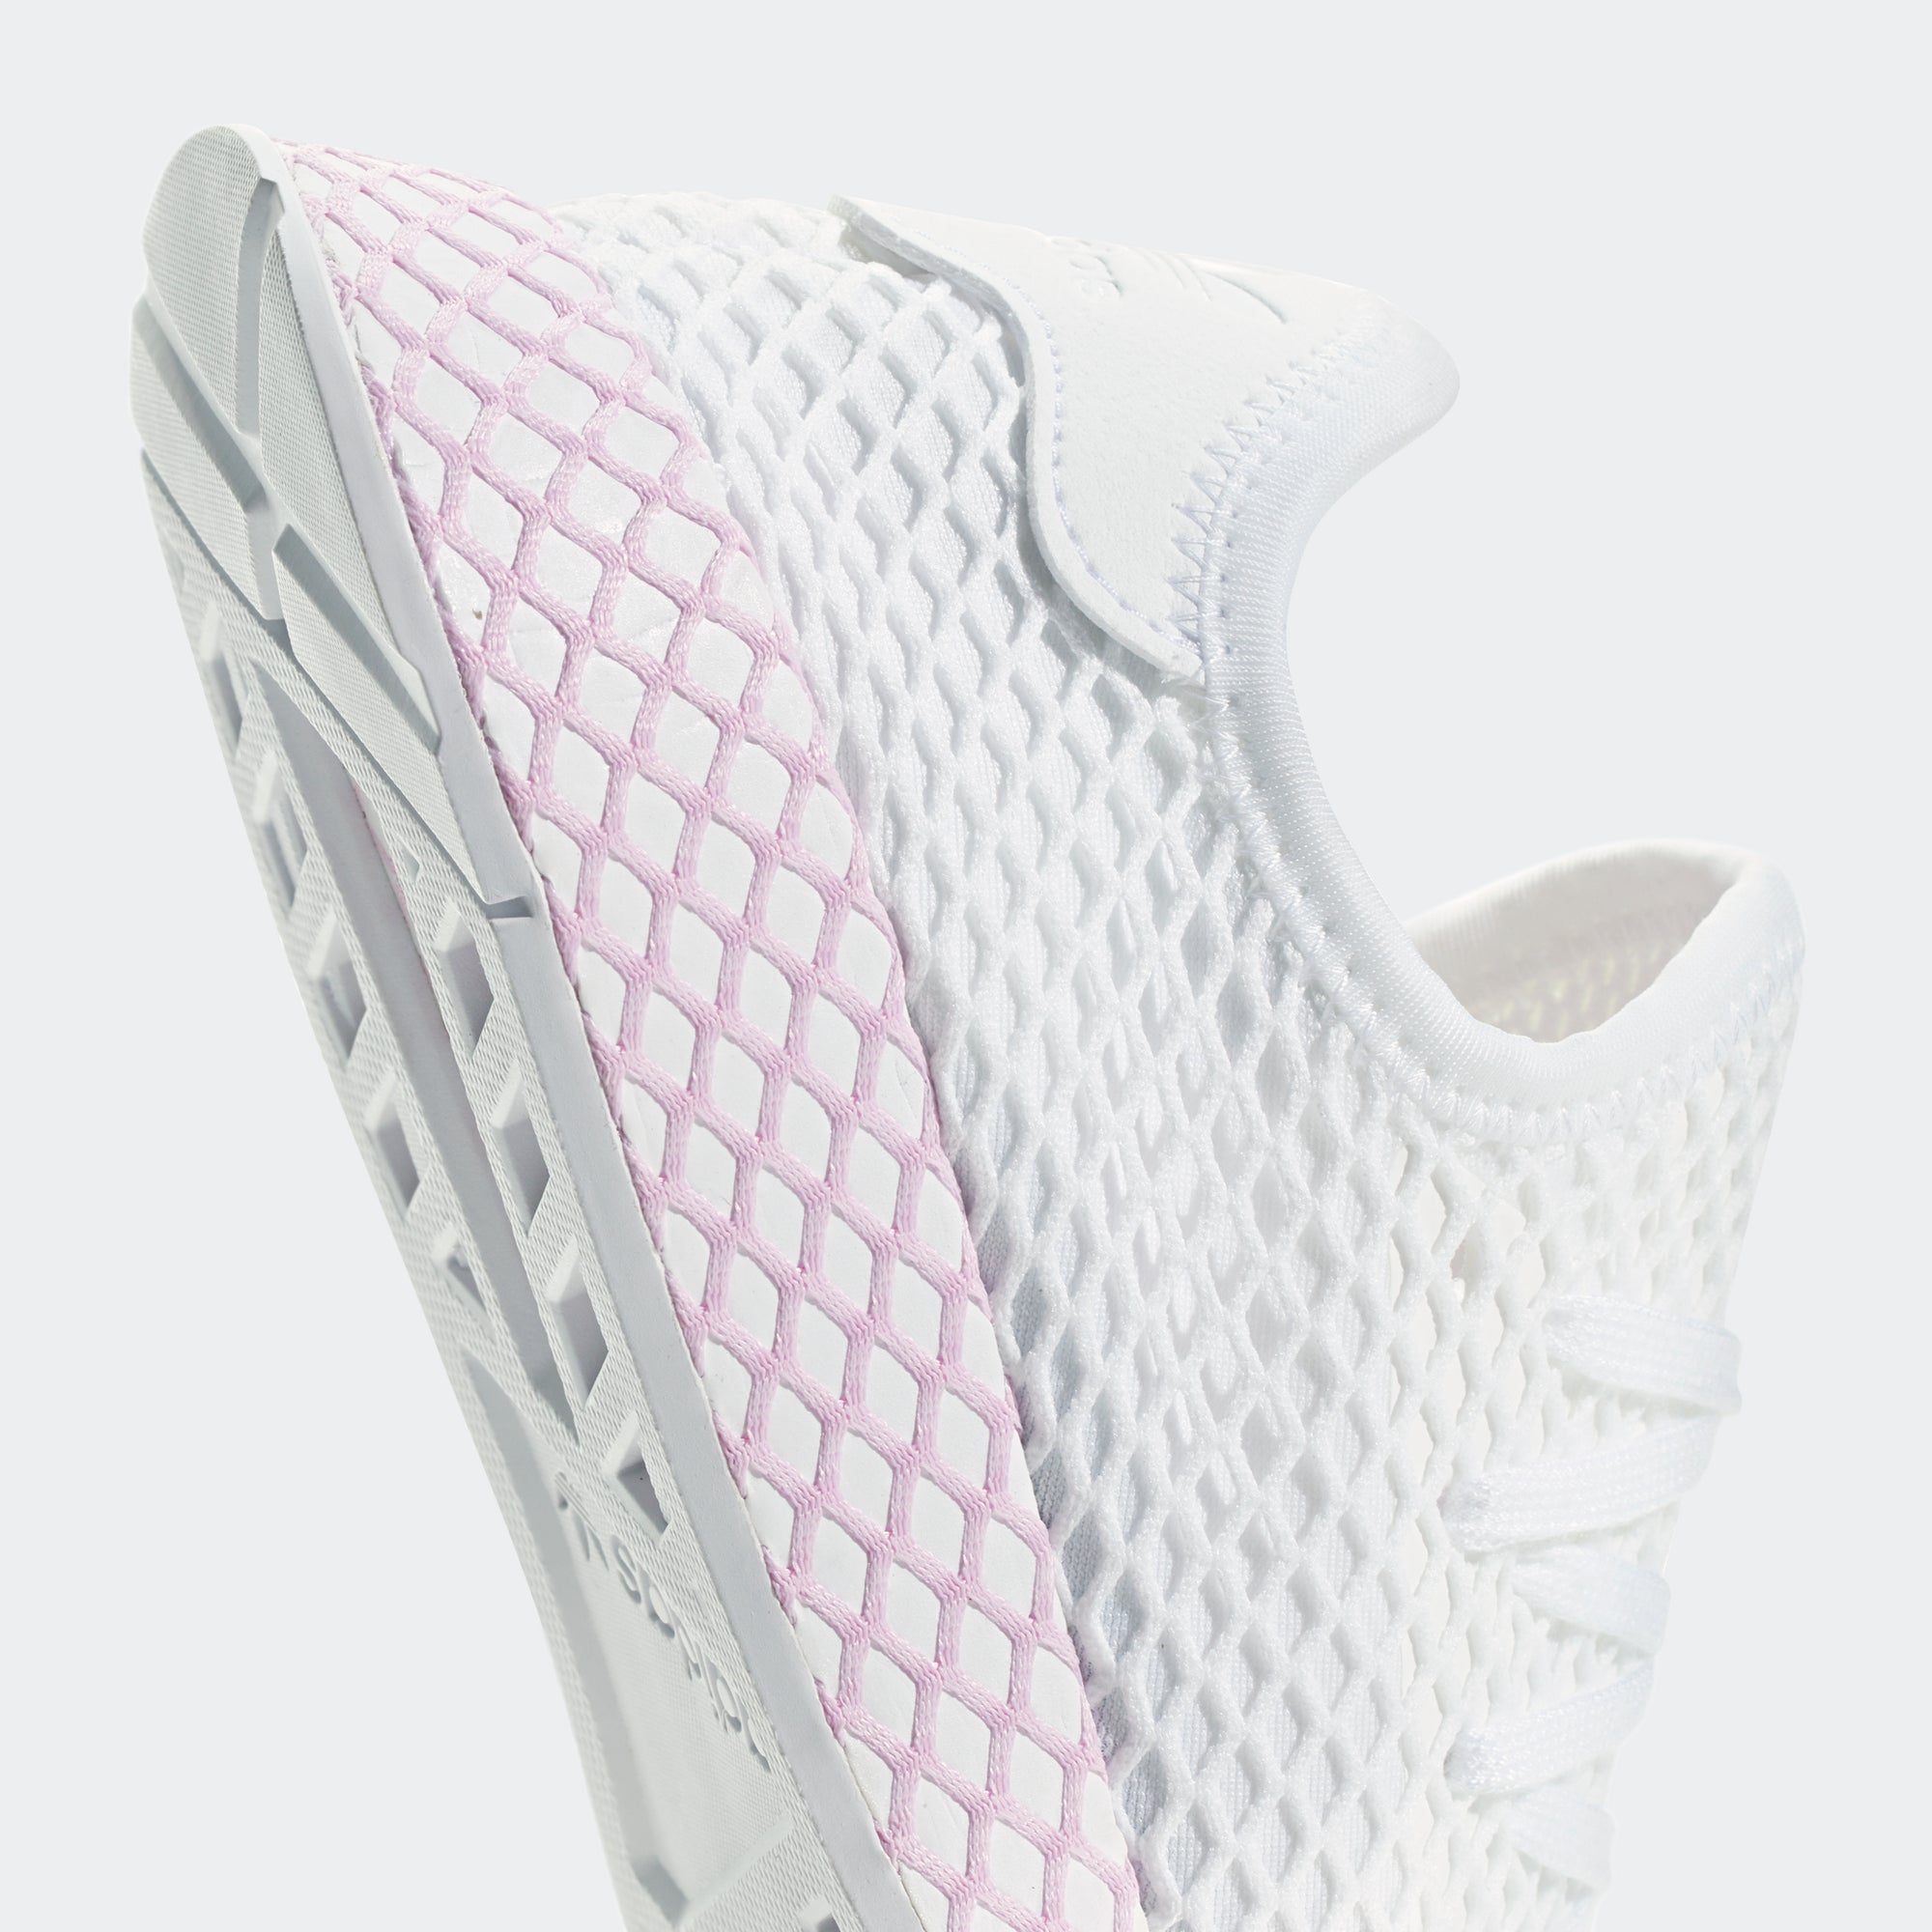 adidas originals deerupt sneakers in white and lilac